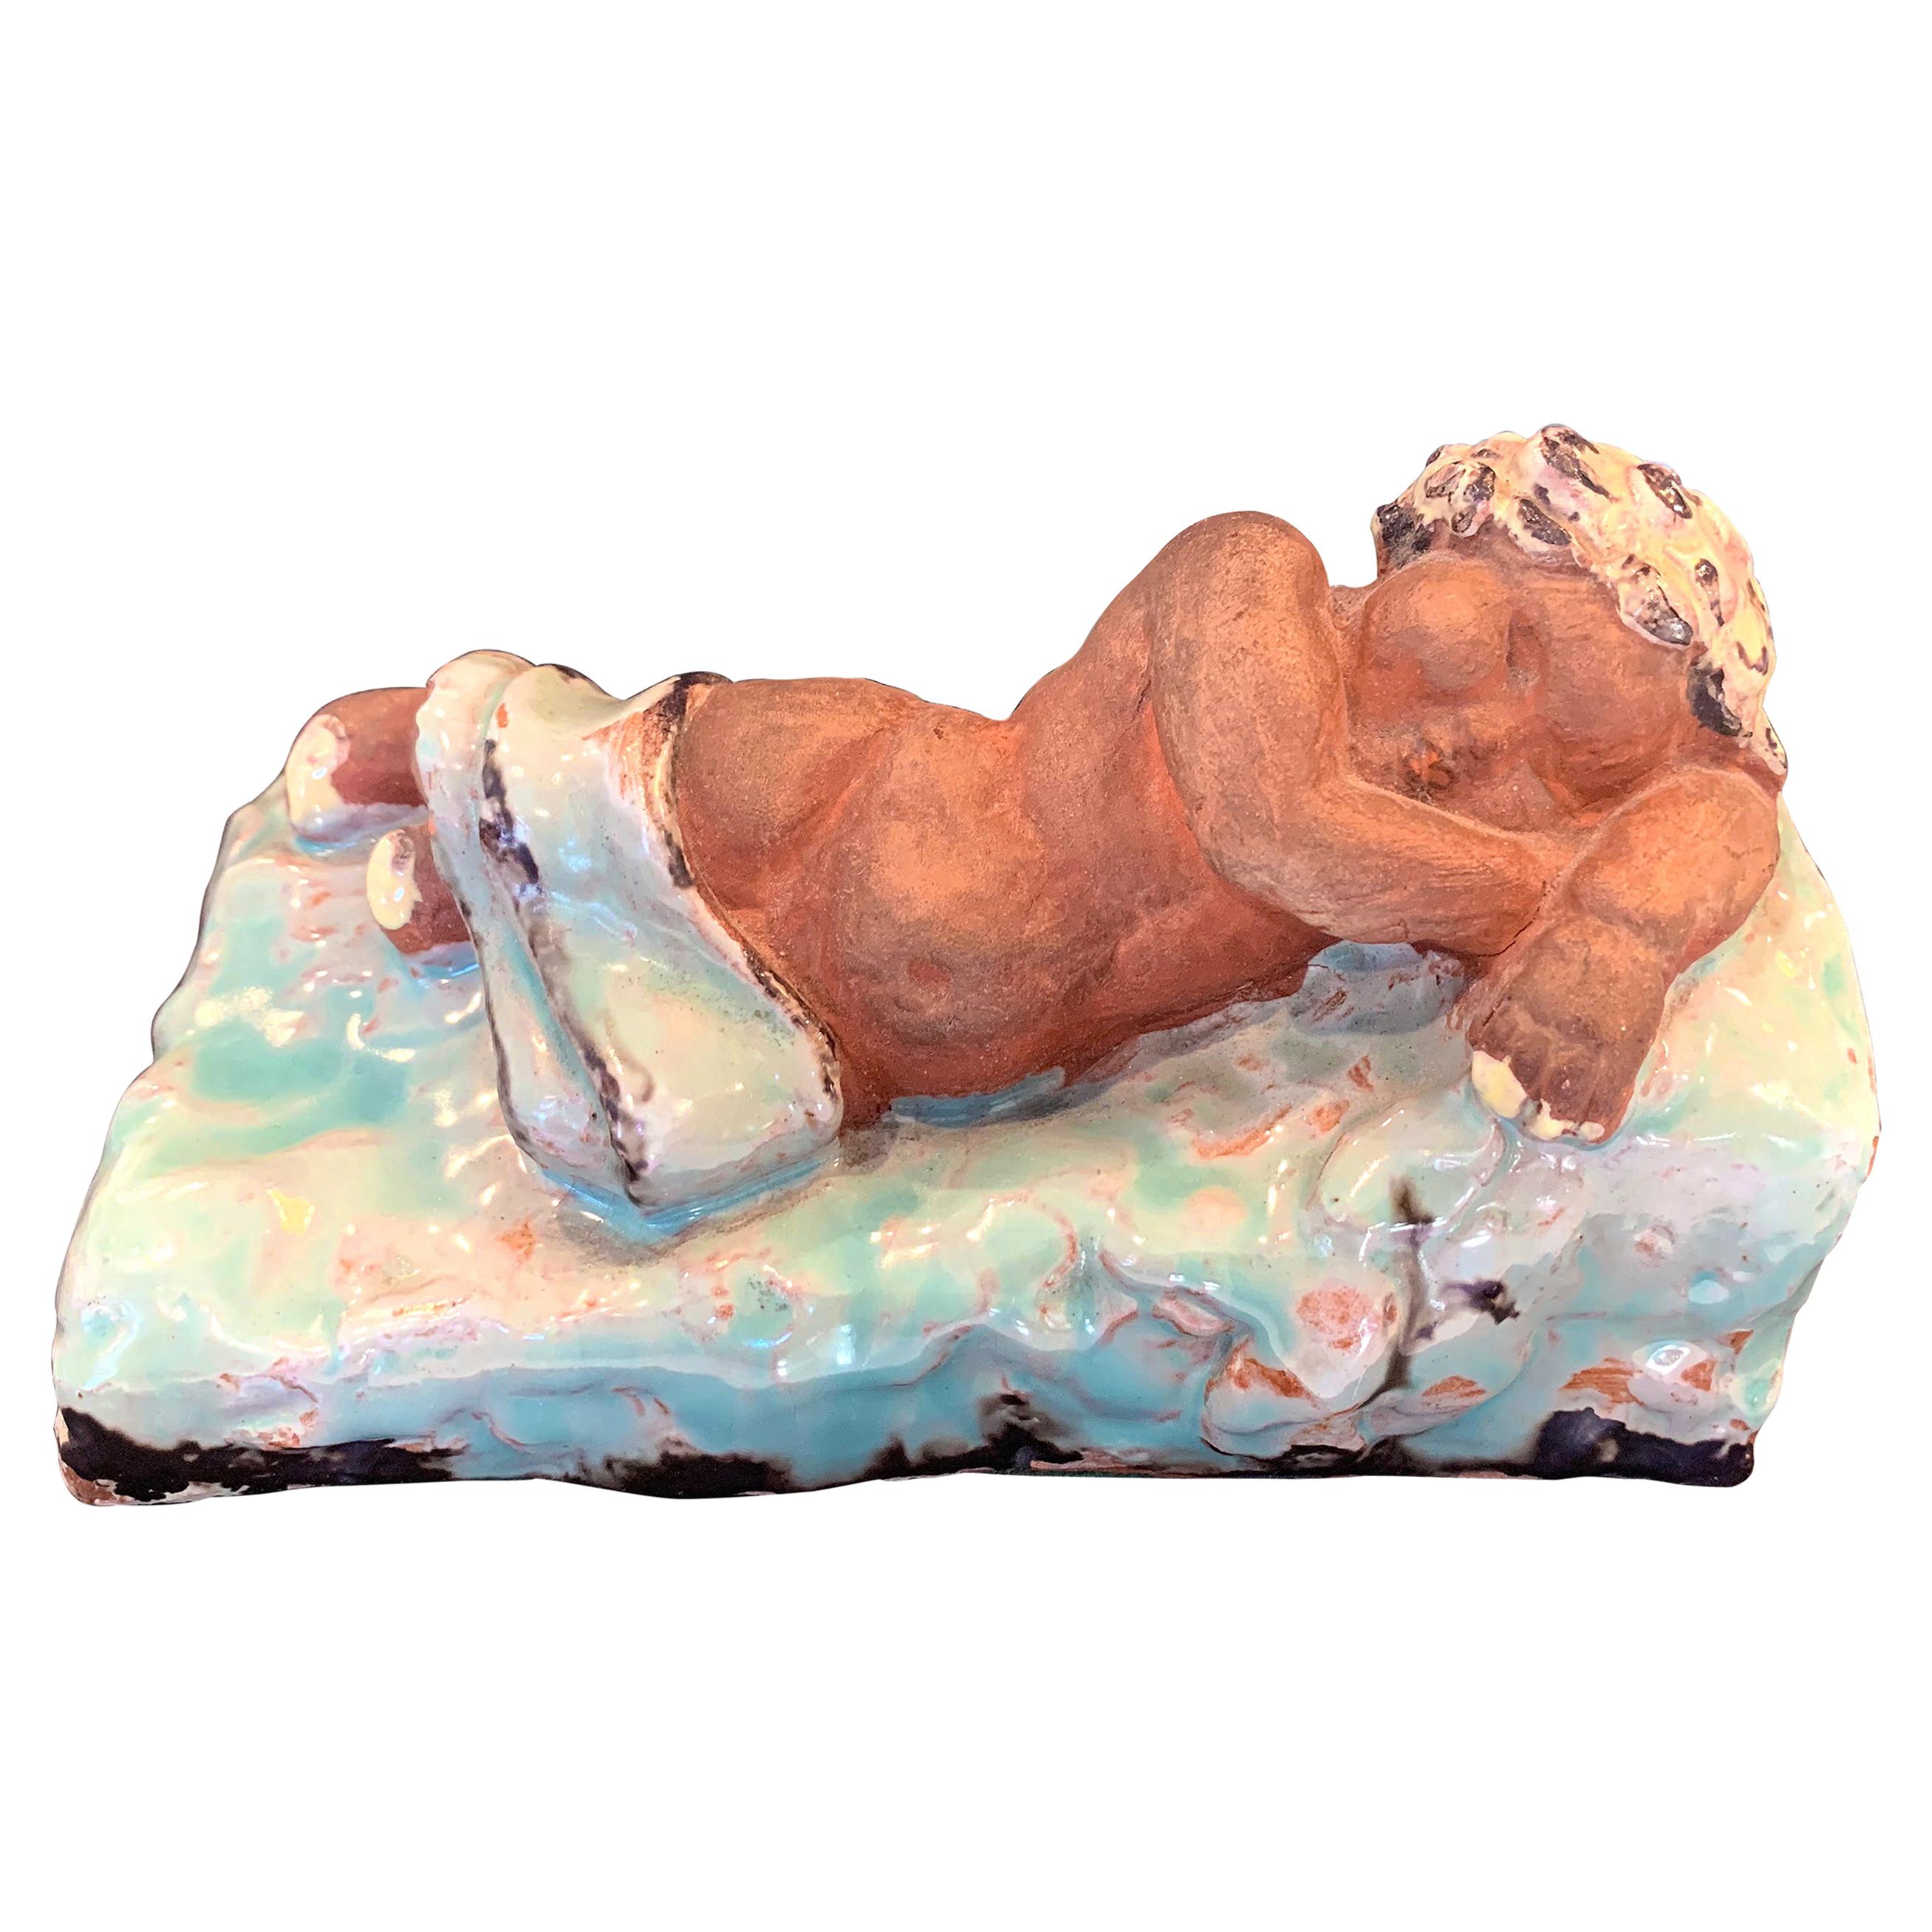 Sleeping Child Bookends, Probably Viennese, with Pale Blue and Yellow Glazes